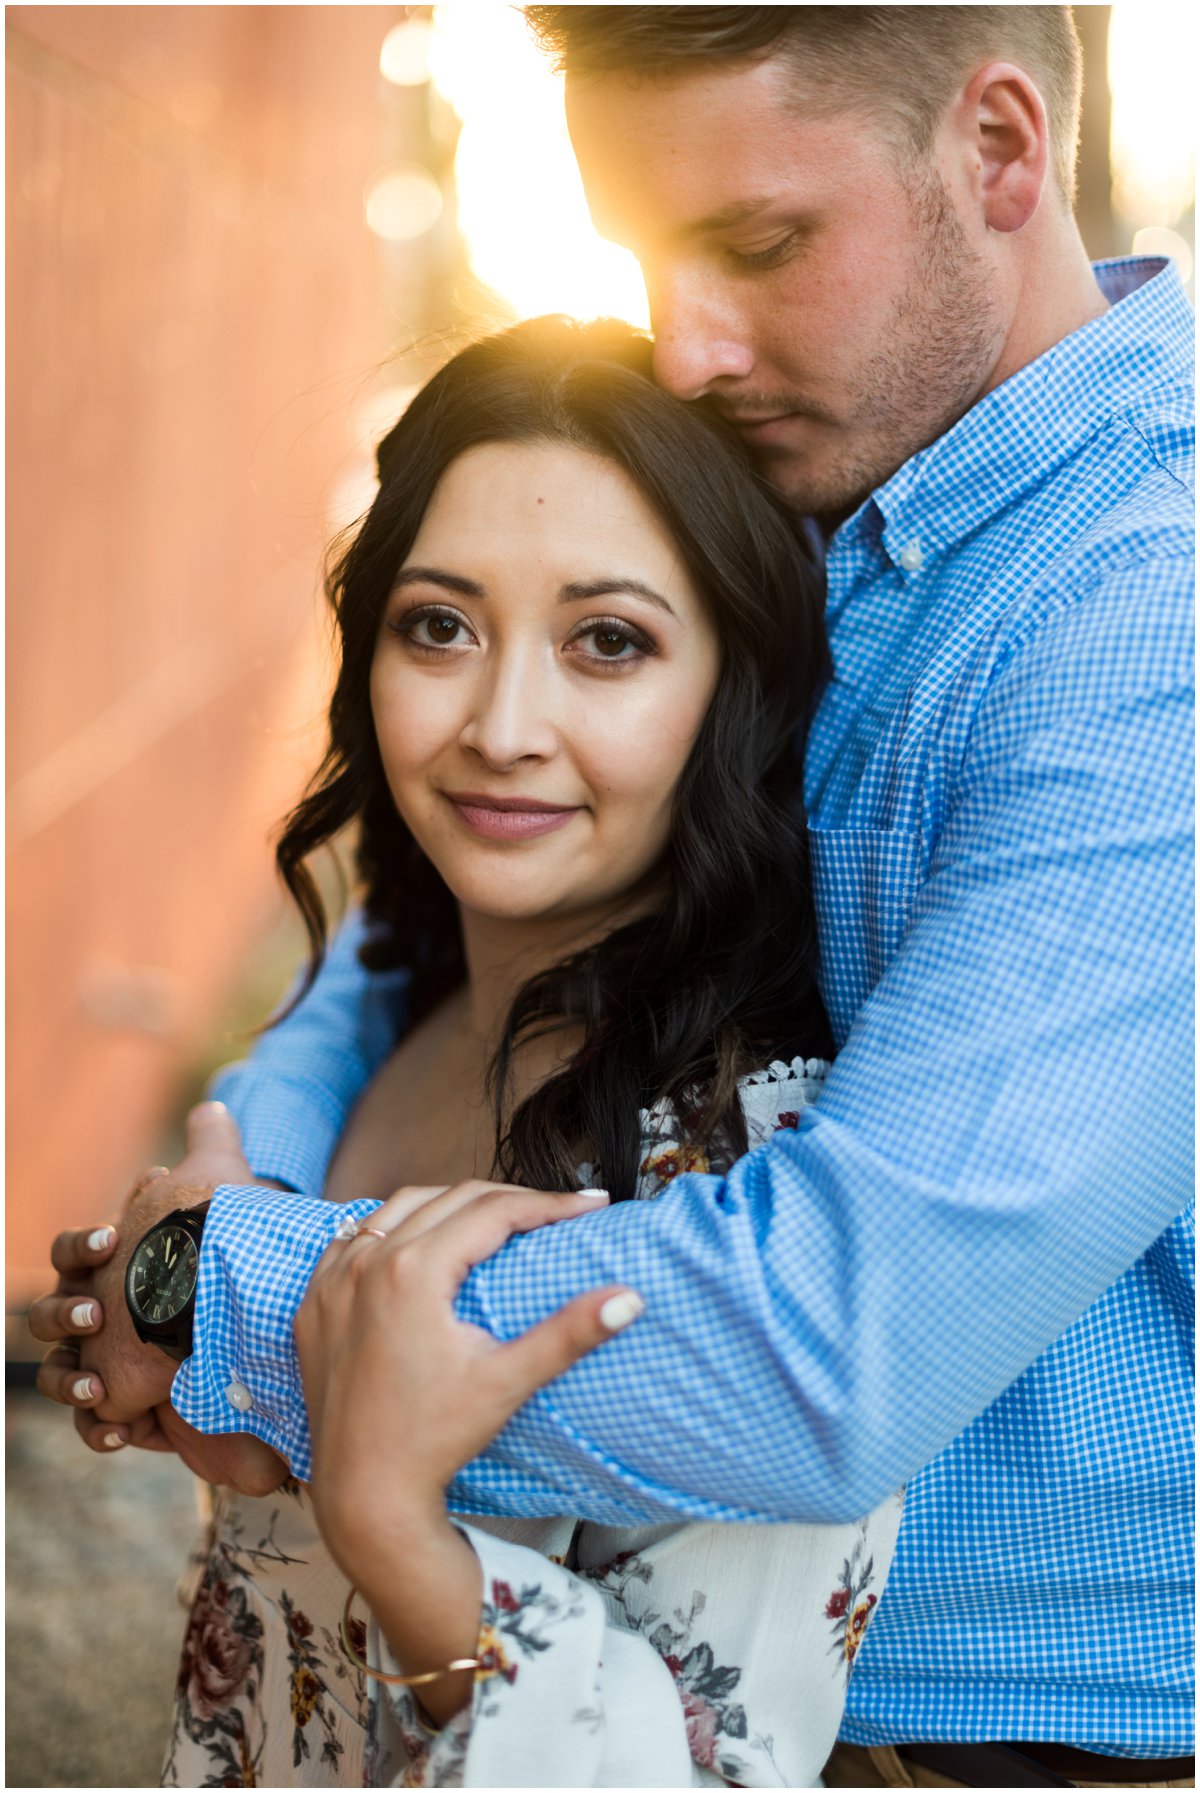  Fun and Colorful Engagement Photos at Scottsdale Civic Center in Scottsdale, Arizona with Minto Be Bride Blogger, Valerie Garcia. 